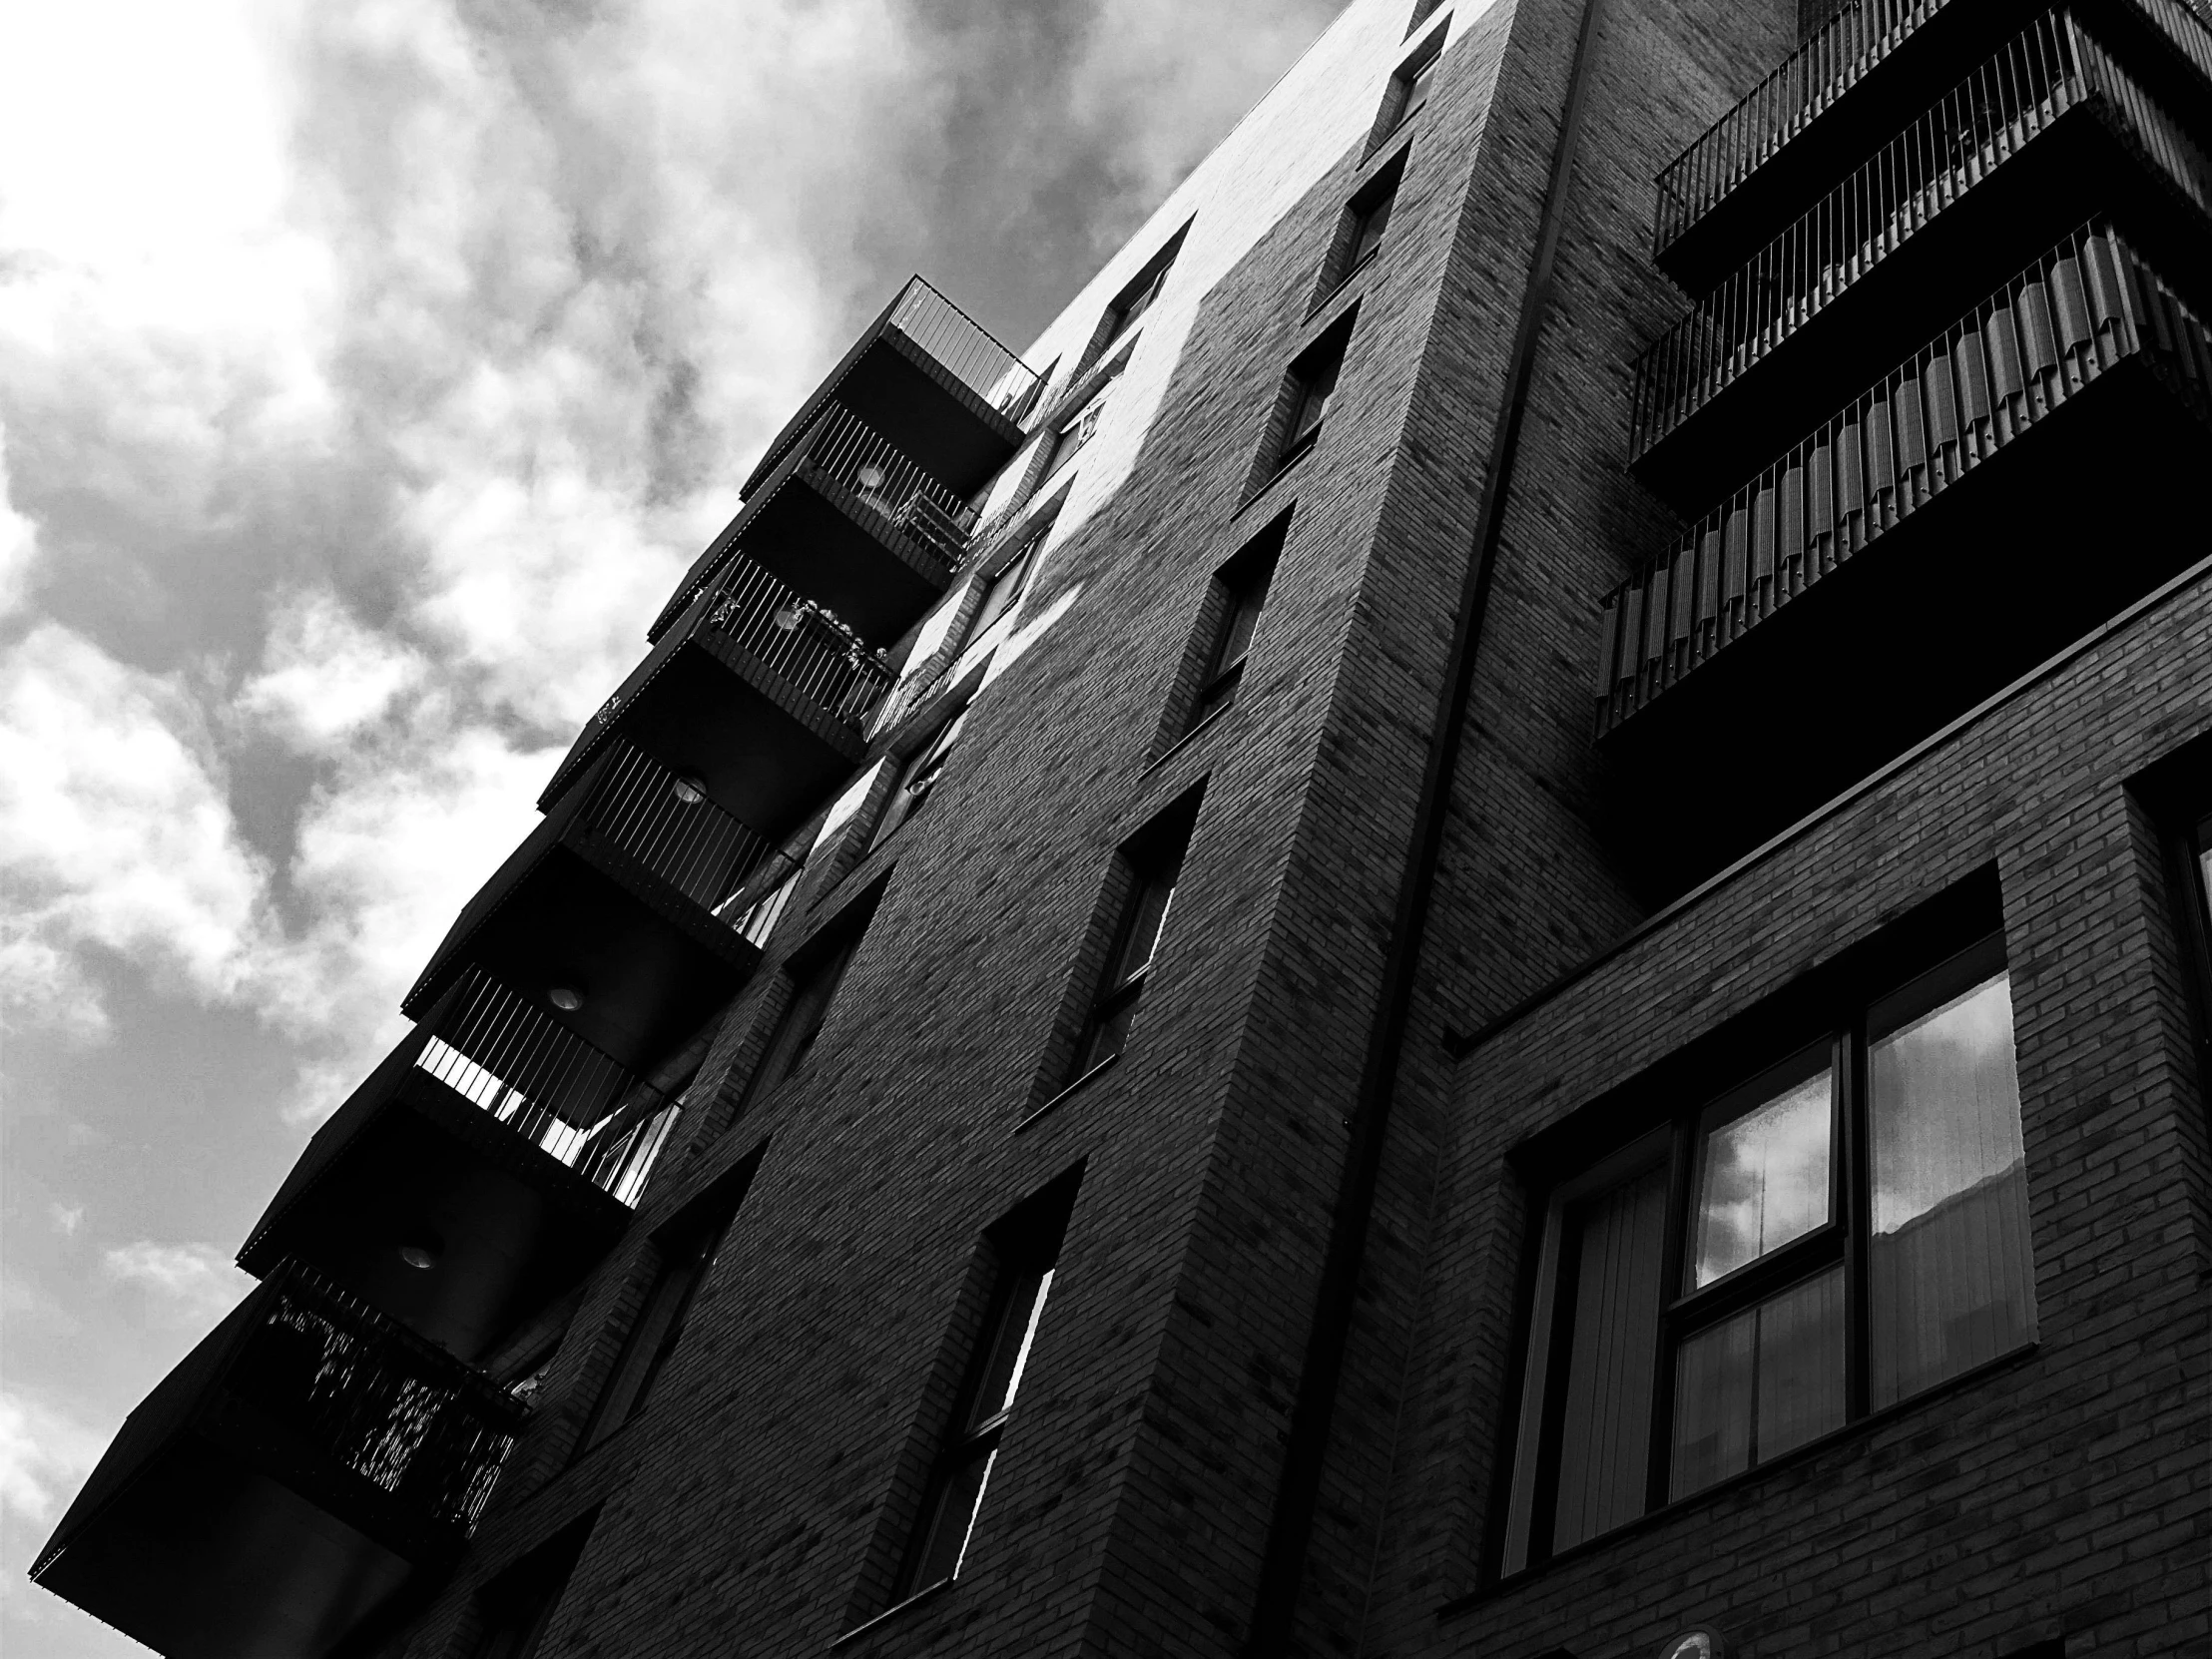 a black and white photo of a tall building, a black and white photo, unsplash, brick building, balconies, moody sky at the back, ten flats